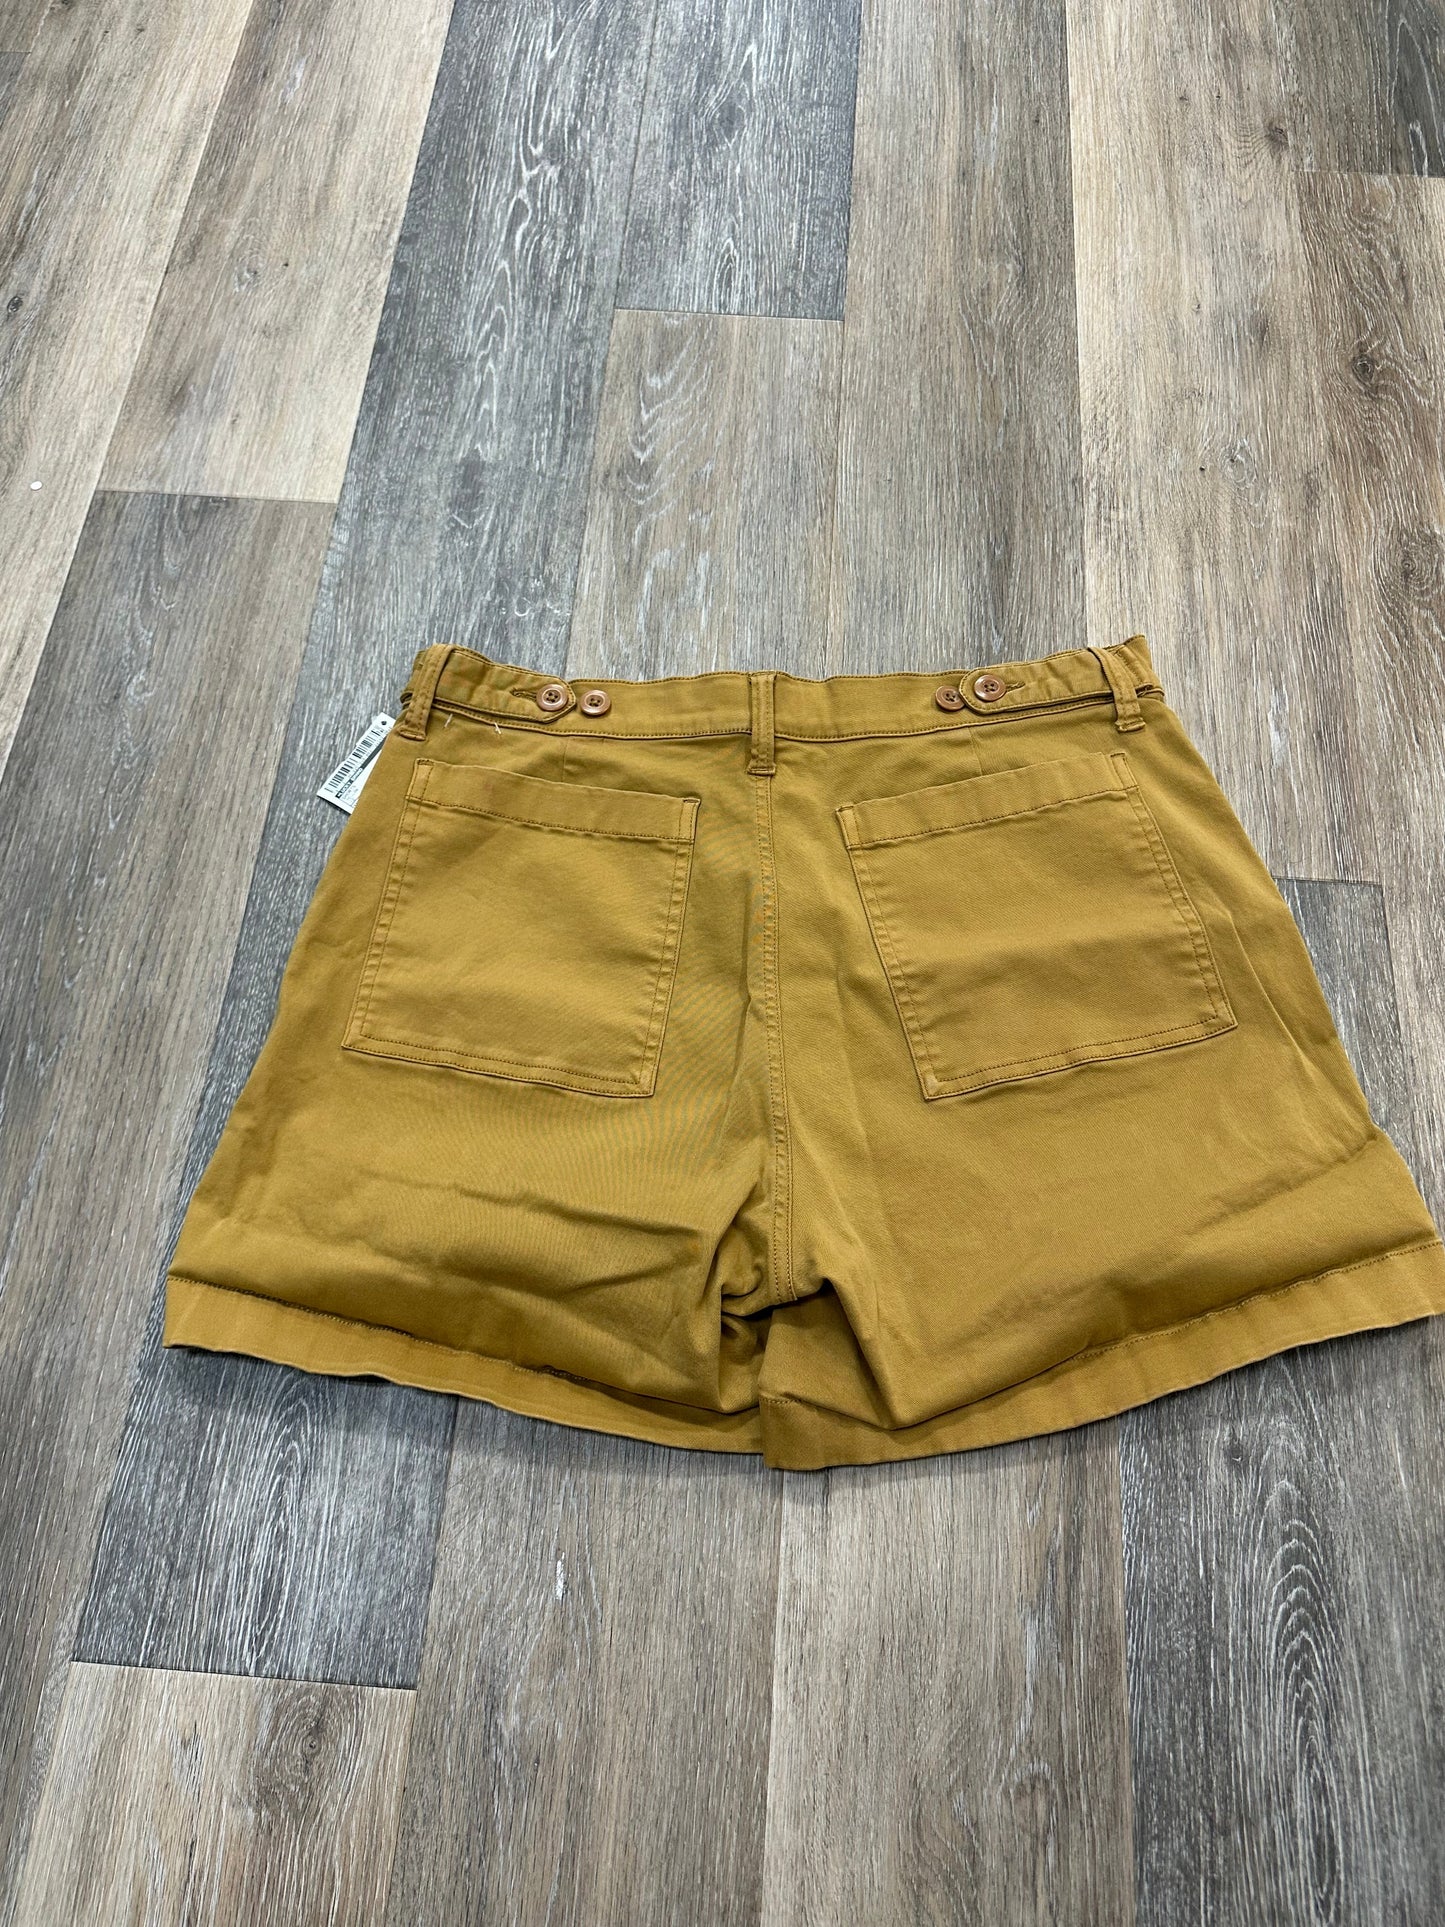 Yellow Shorts Lucky Brand, Size 12